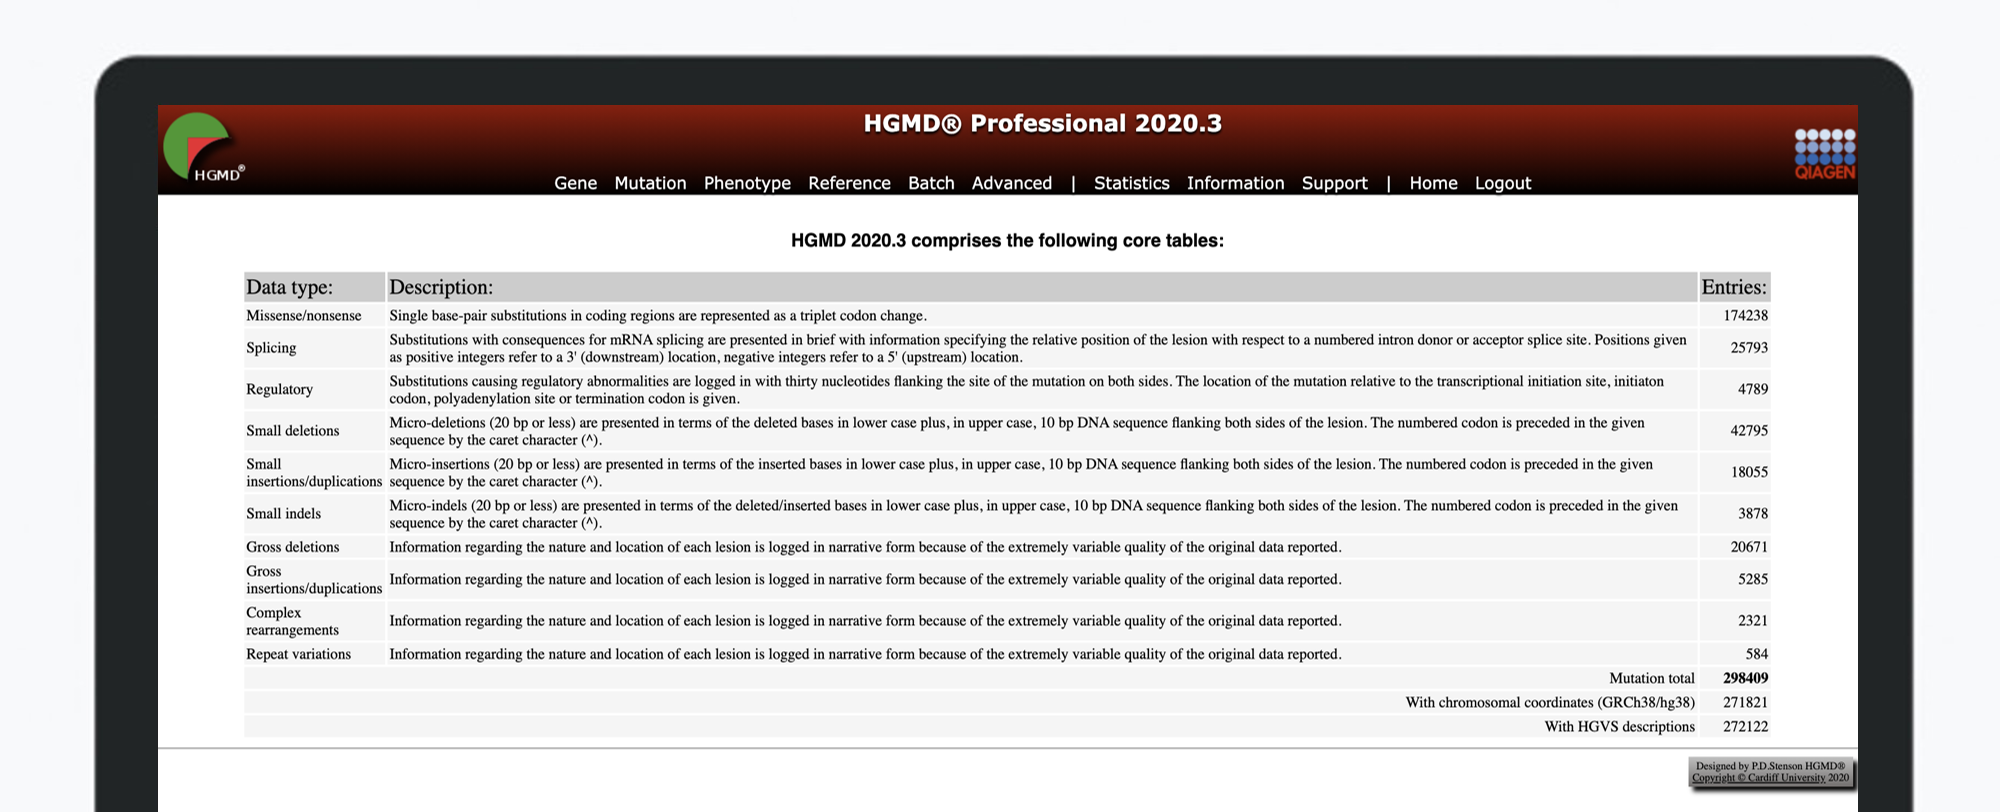 HGMD Professional 2020.3 Release